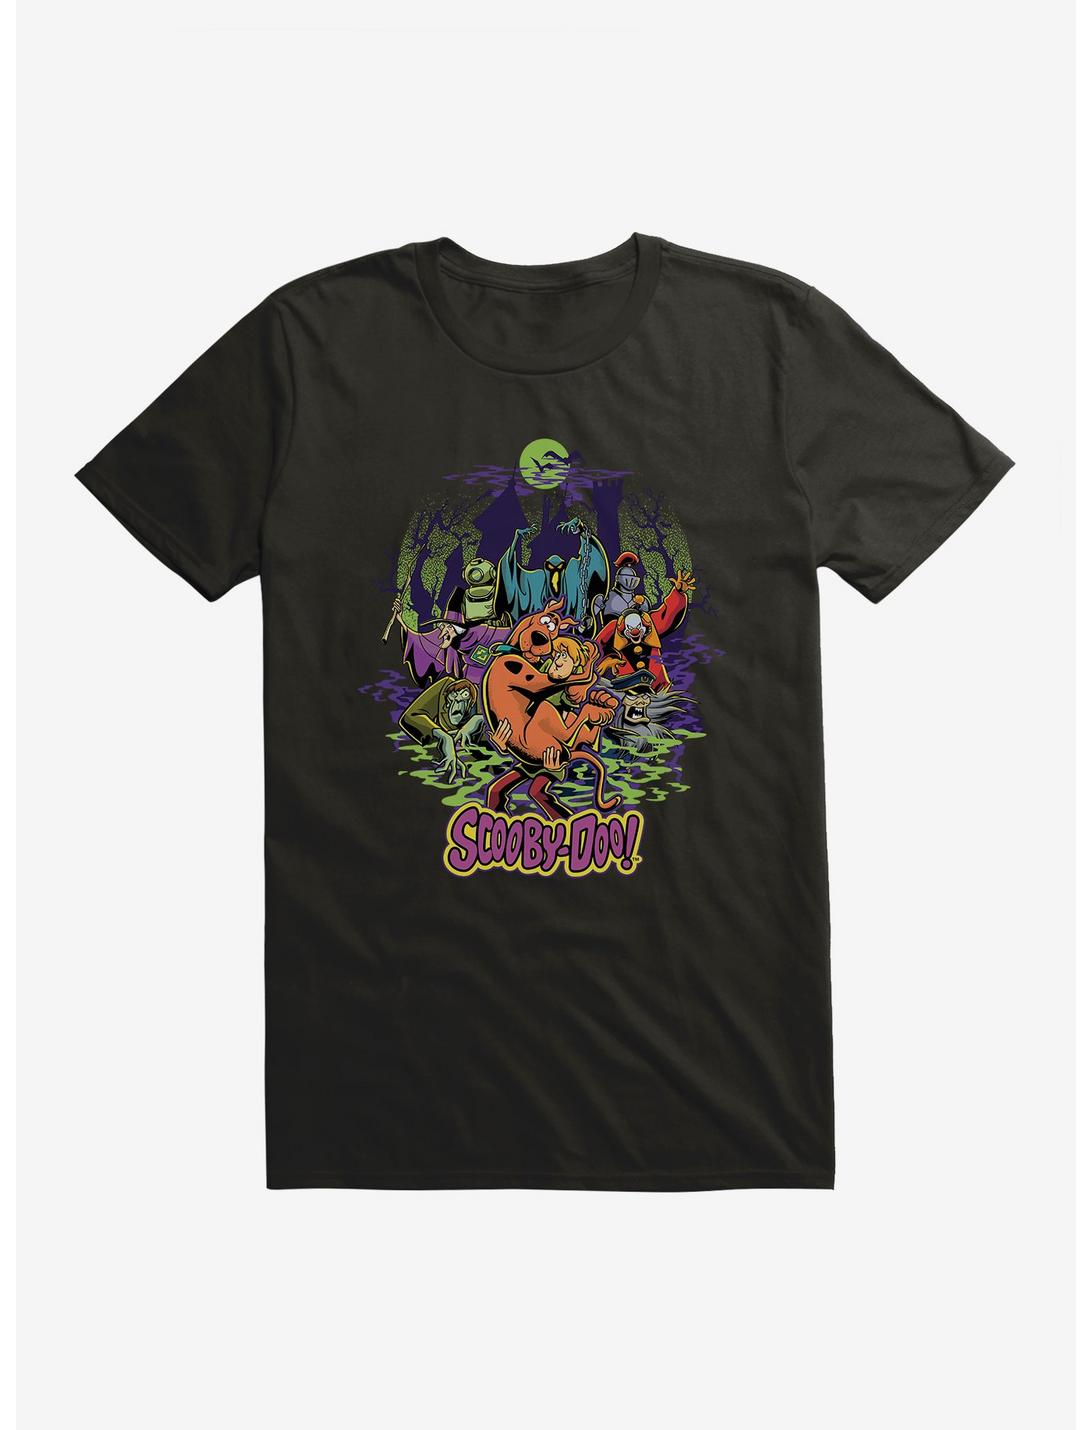 Scooby-Doo Spooky Monsters Shaggy And Scooby T-Shirt, BLACK, hi-res